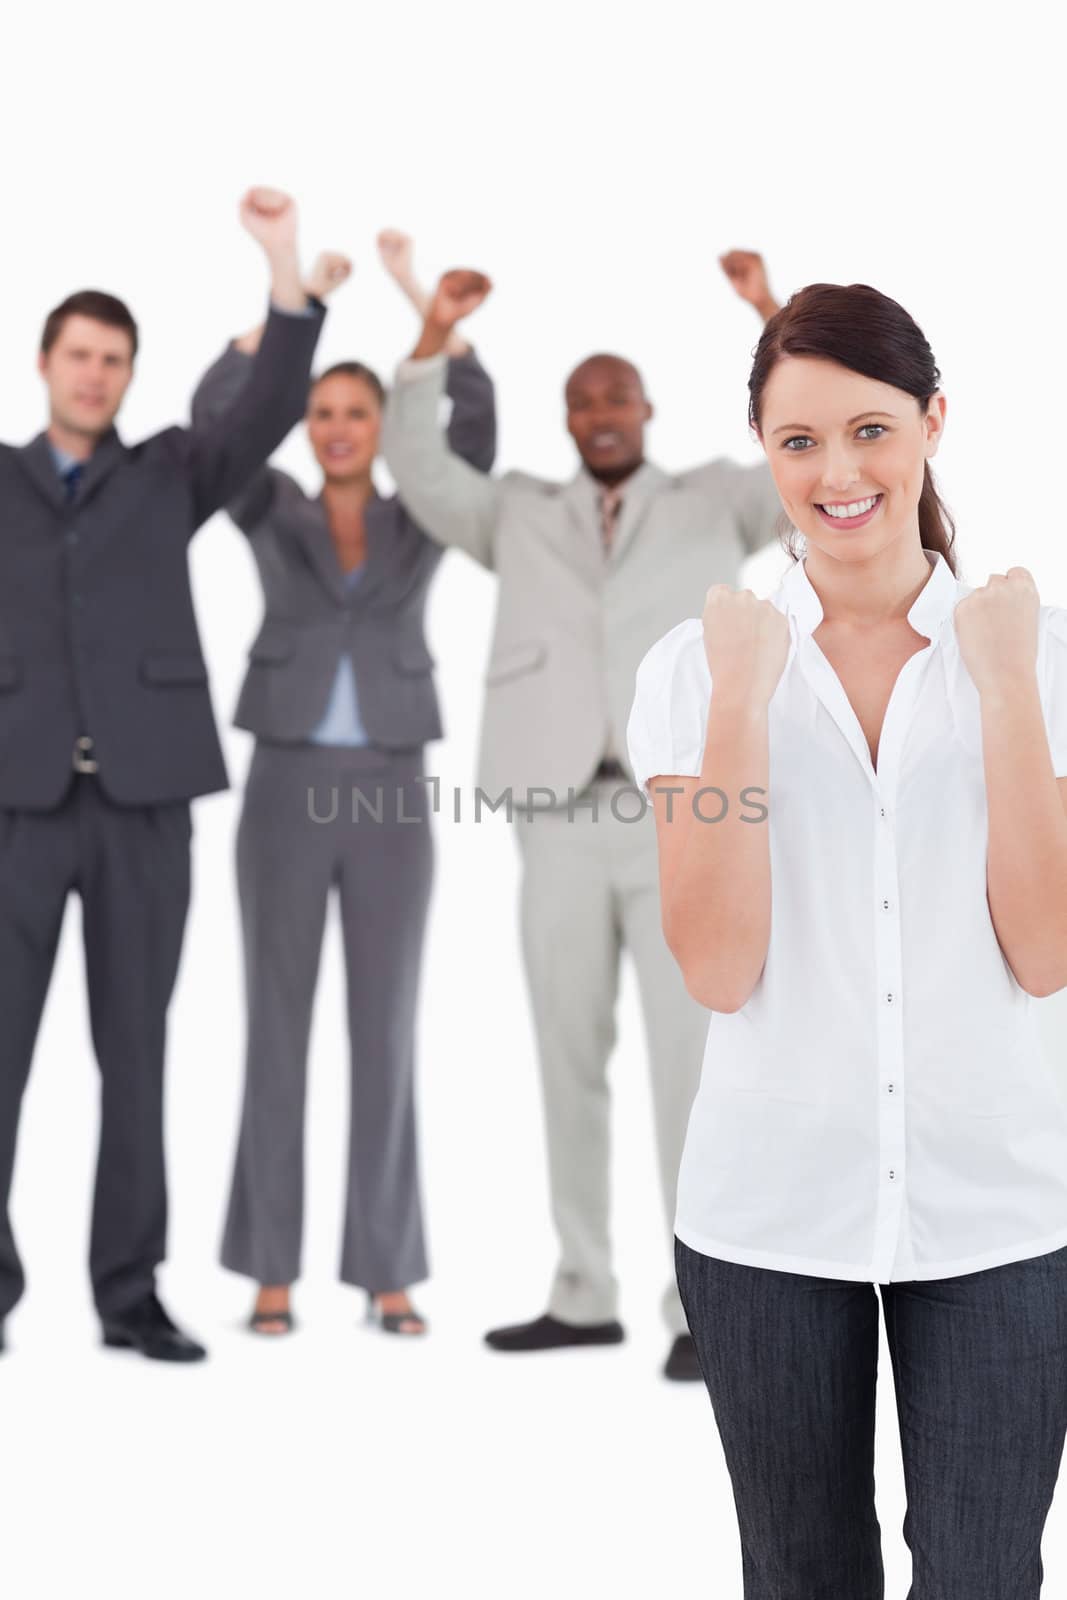 Successful businesswoman with cheering colleagues behind her against a white background